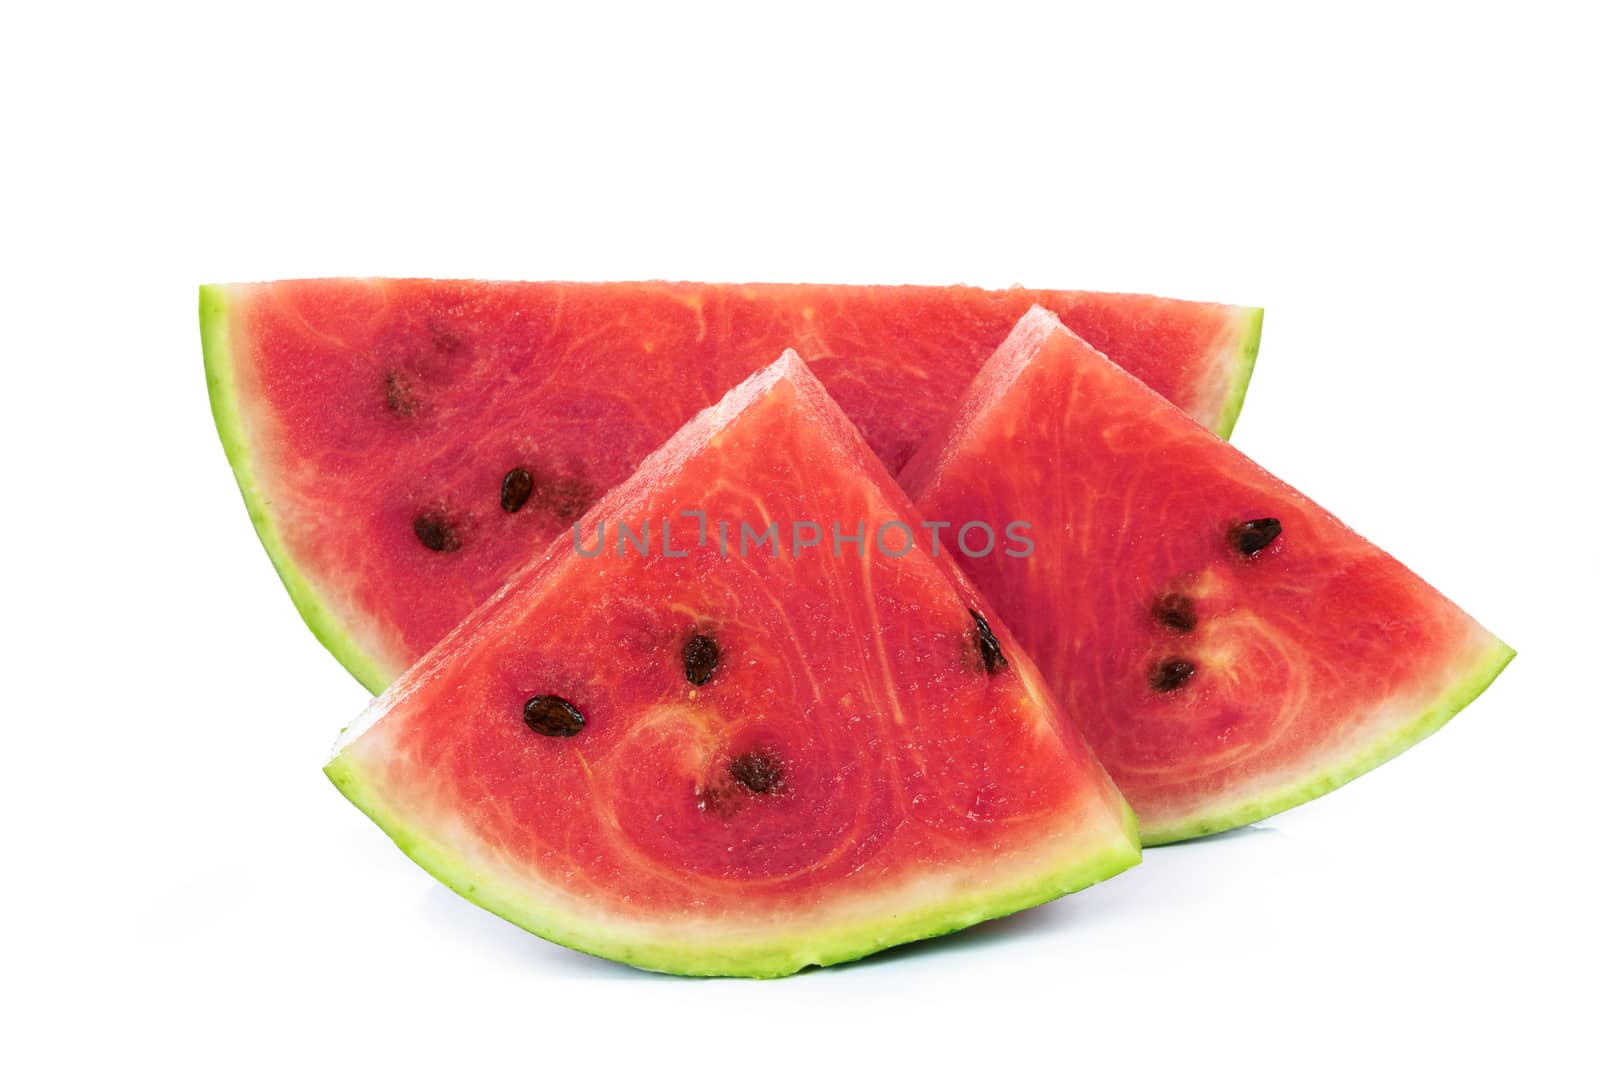 Slices of a fresh and ripe watermelon isolated on a white background in close-up.